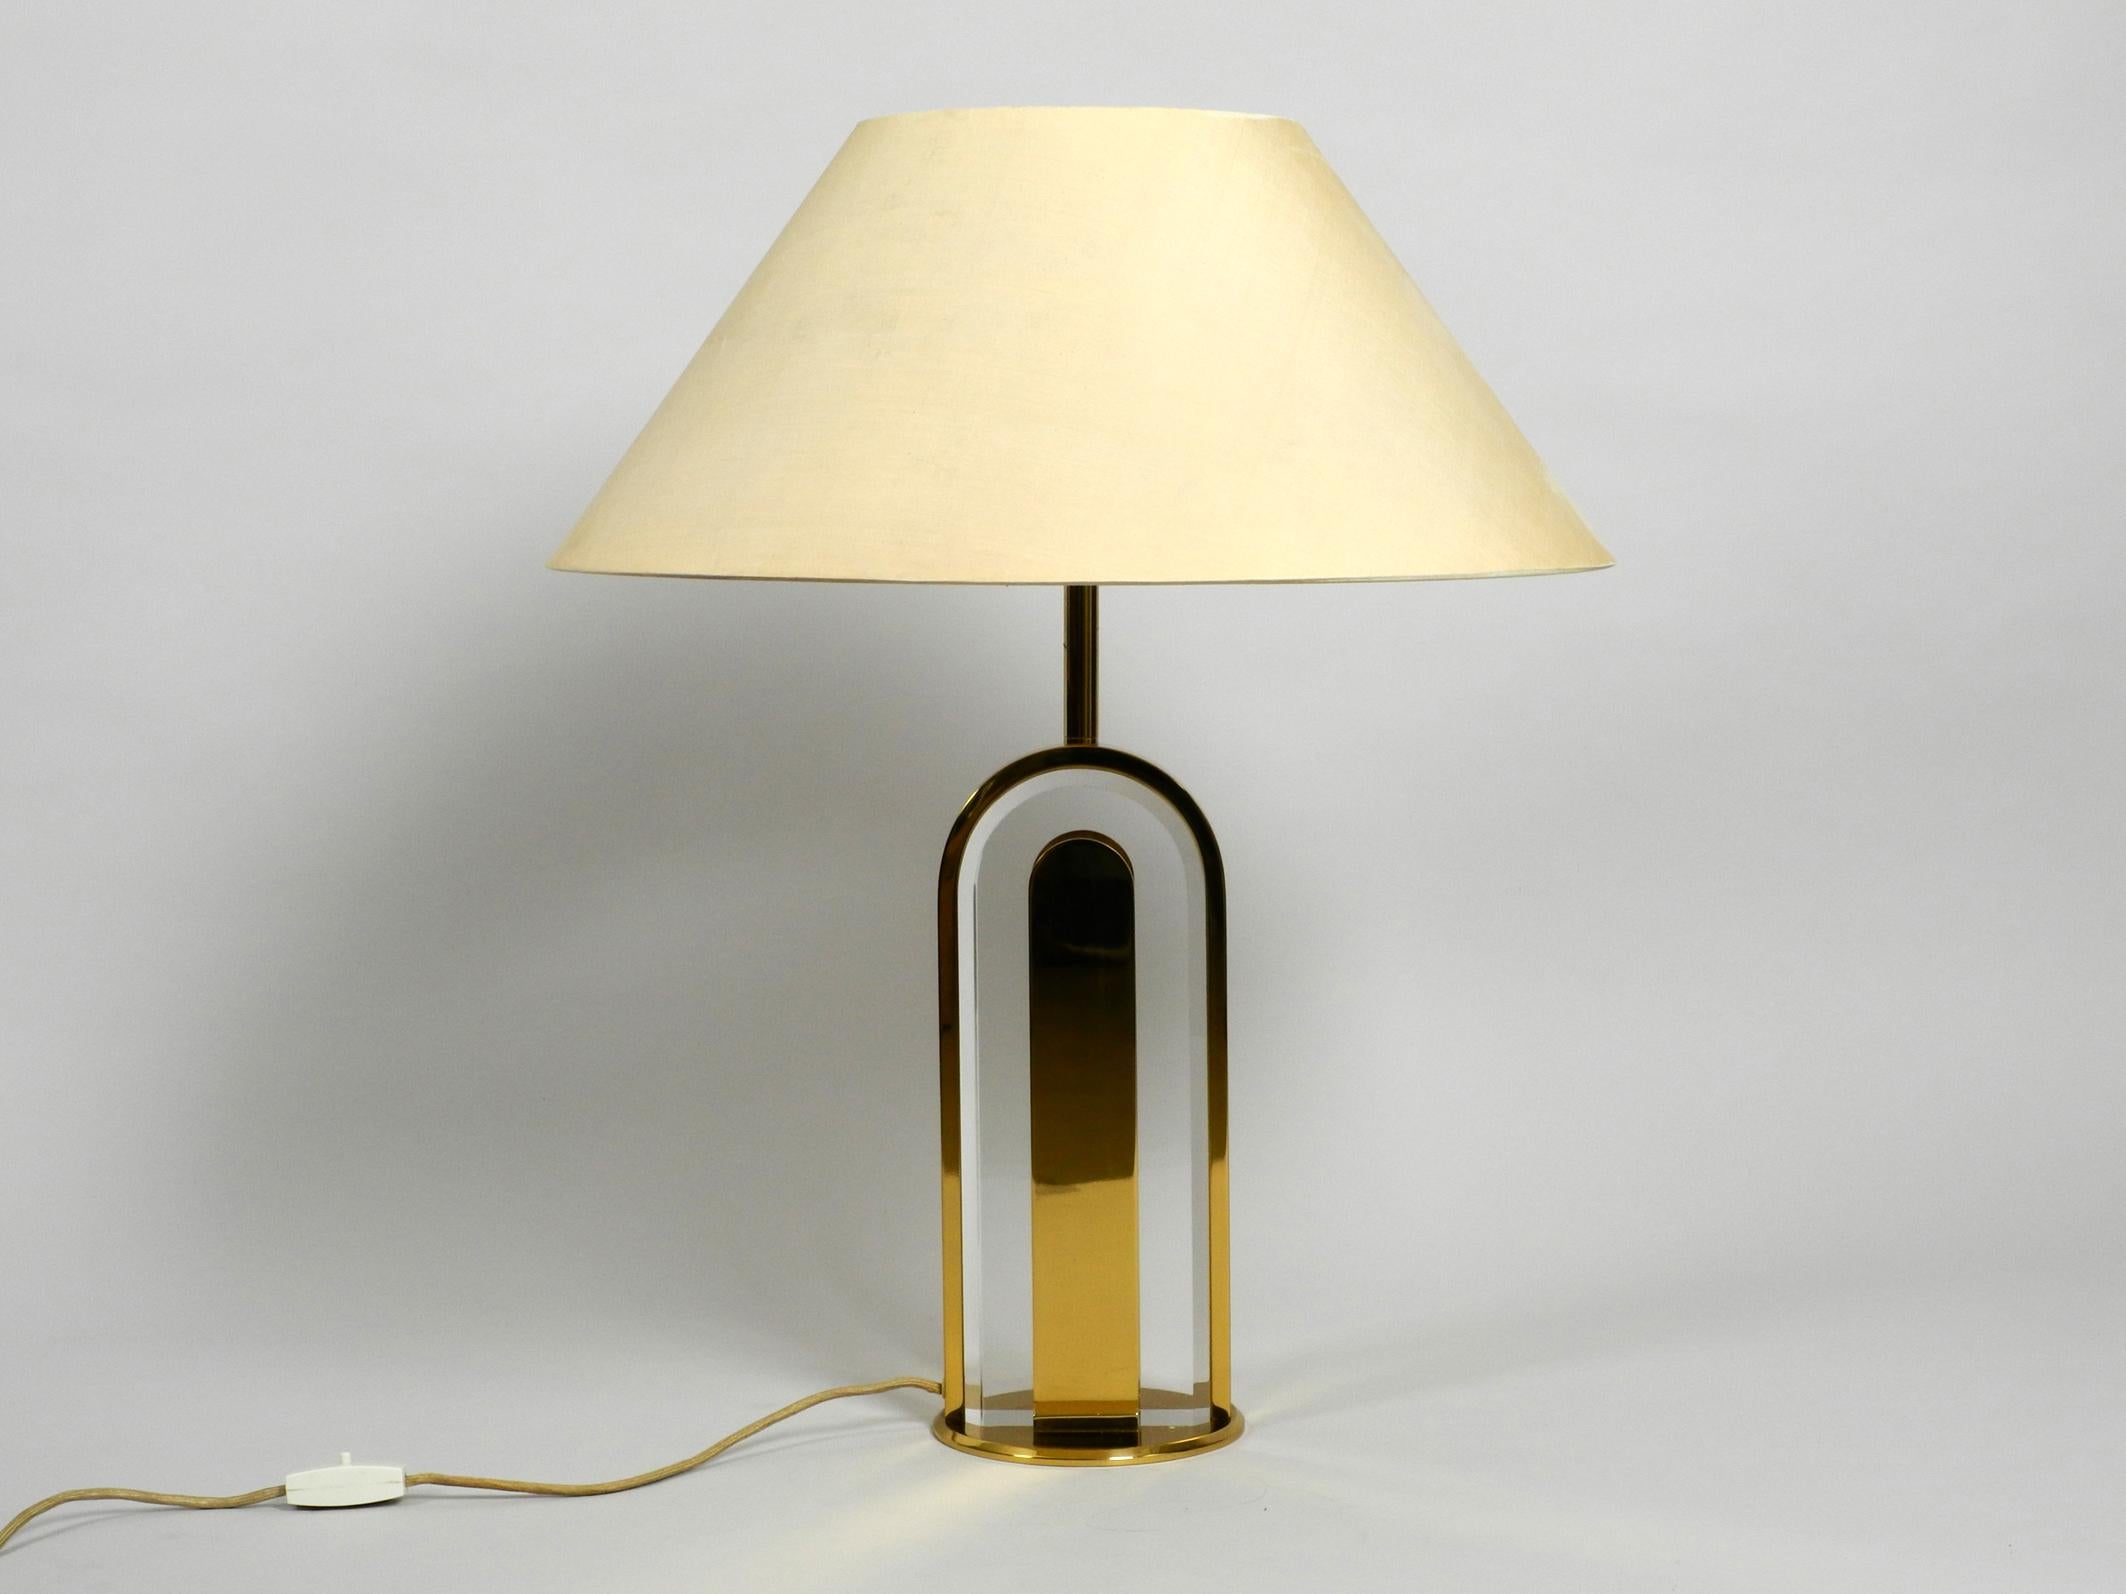 Very rare large table lamp from the Vereinigte Werkstätten collection.
With original label. Made in Germany. Made in the 1970s.
Great very high quality design in original vintage condition.
Made entirely of heavy brass and solid glass.
Lamp is